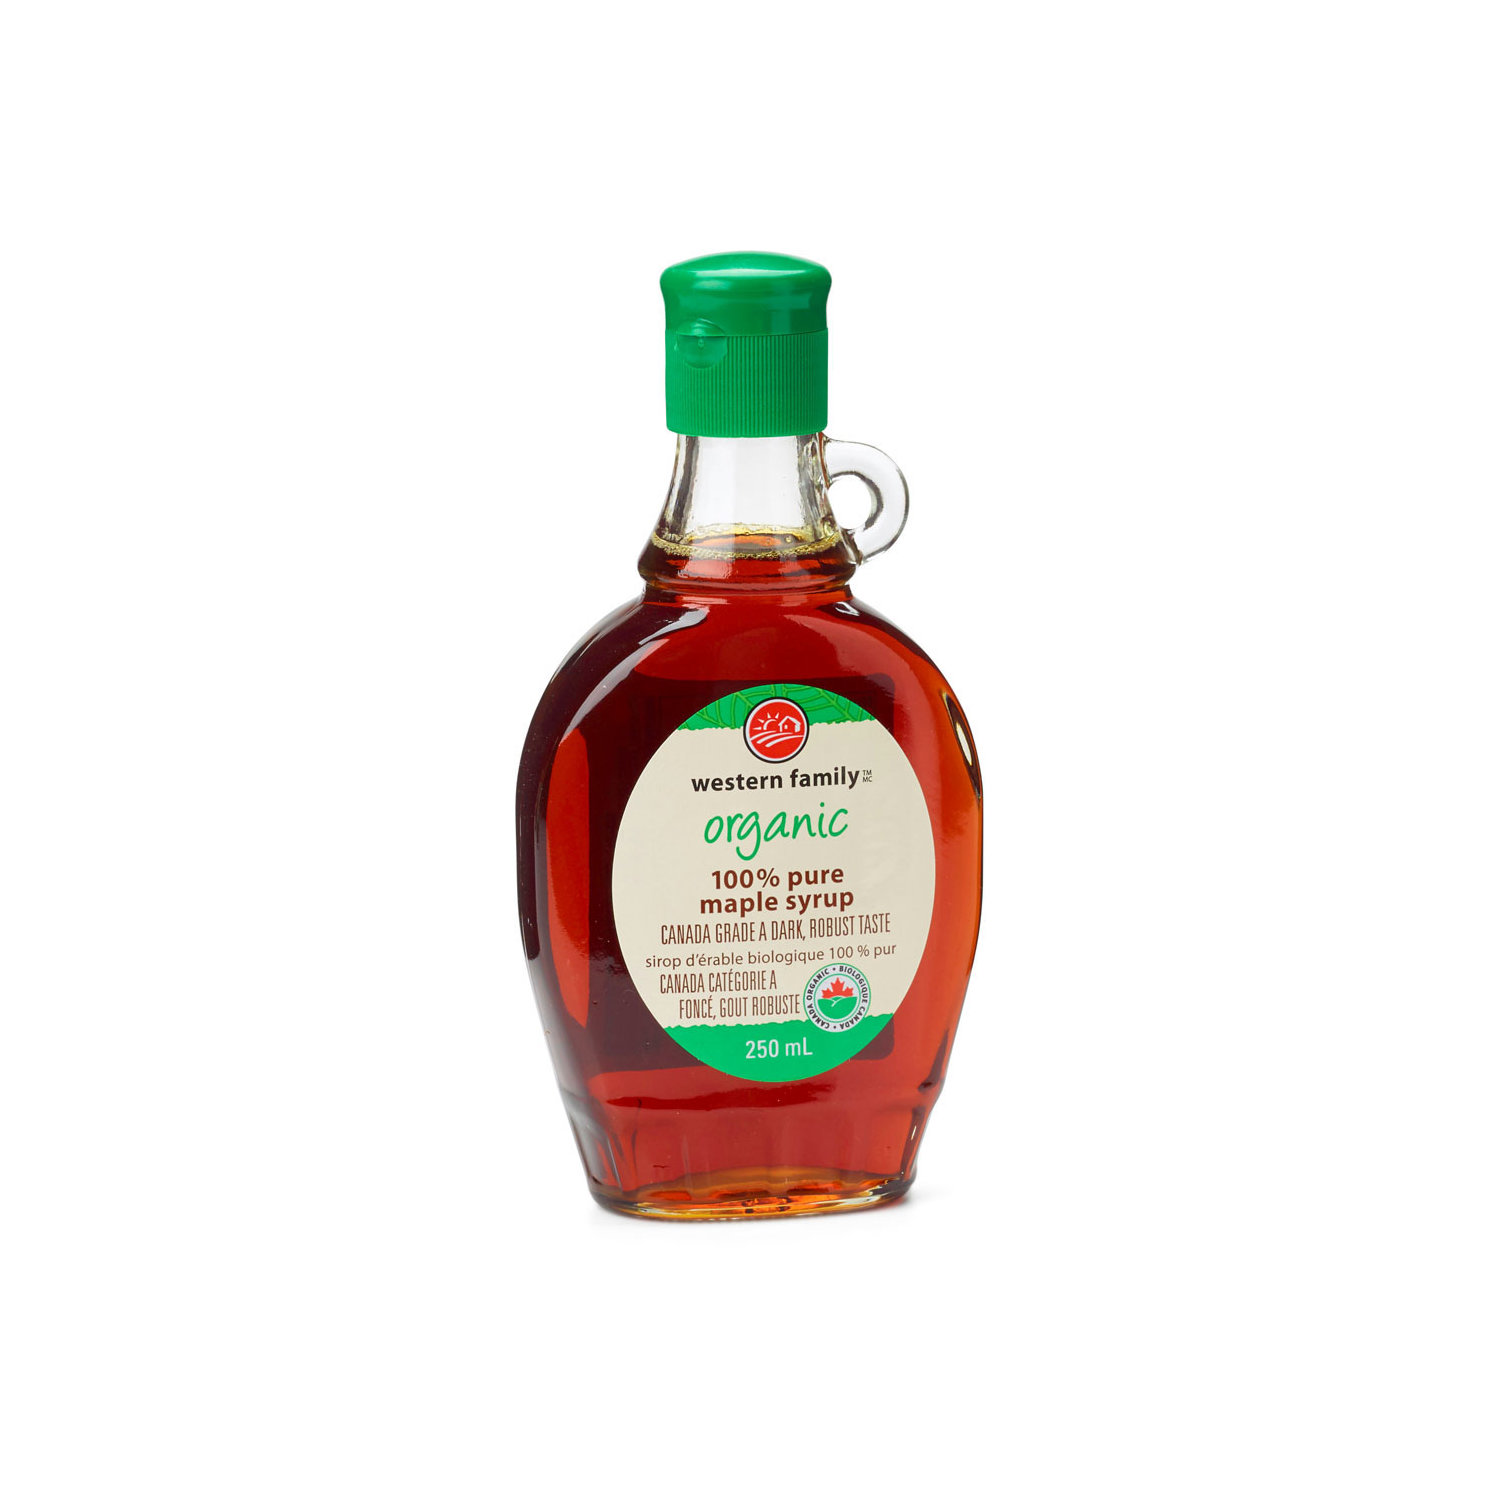 Western Family - Organic Pure Maple Syrup image